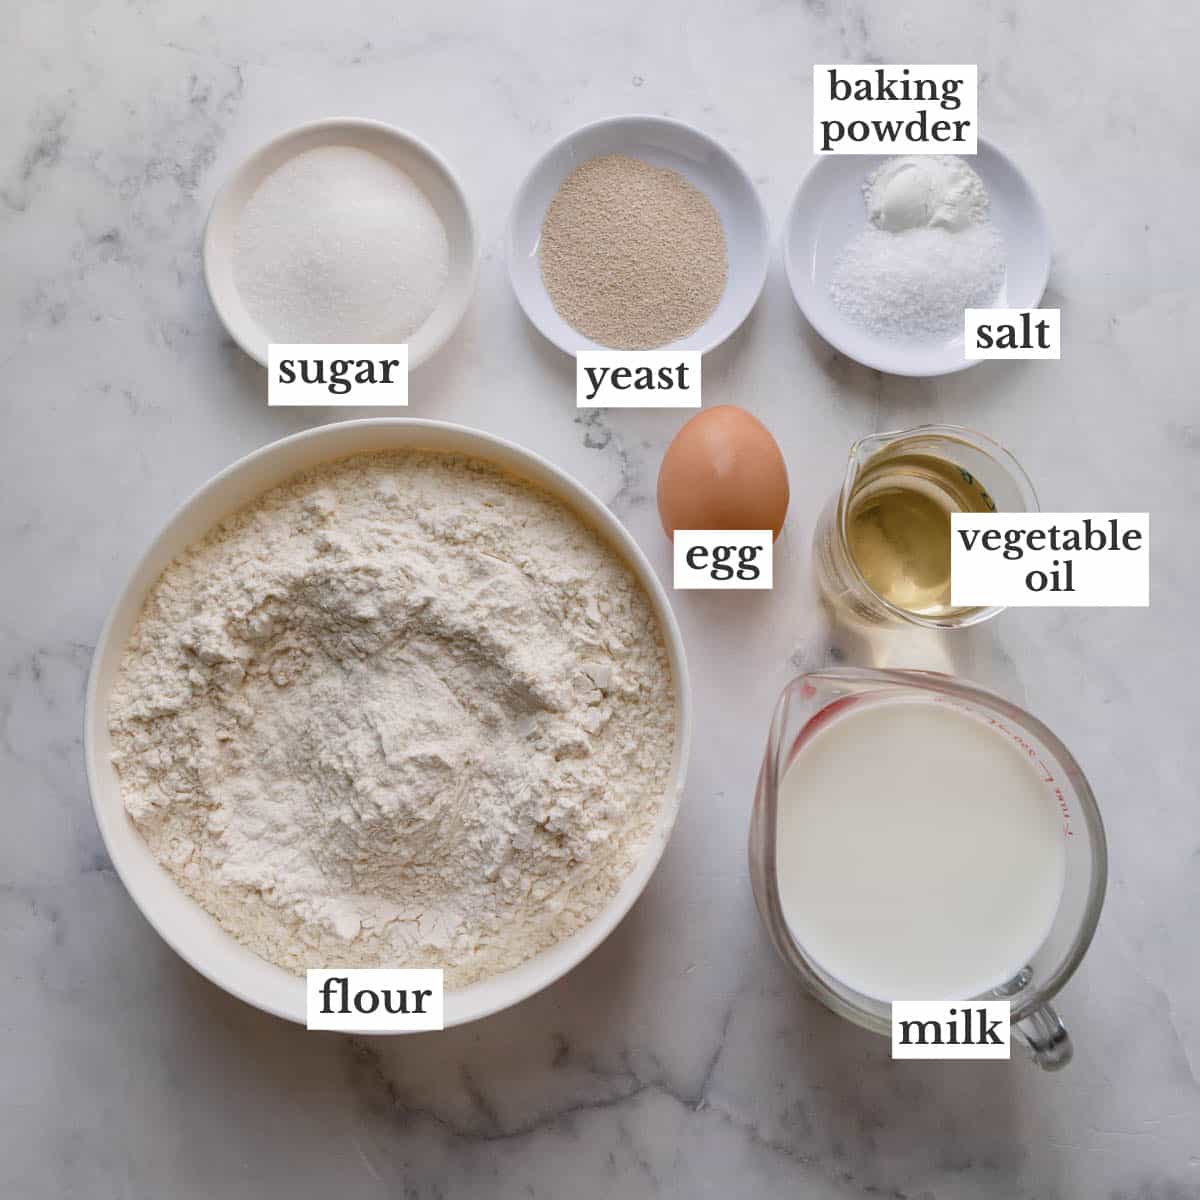 Ingredients needed to make overnight caramel rolls.